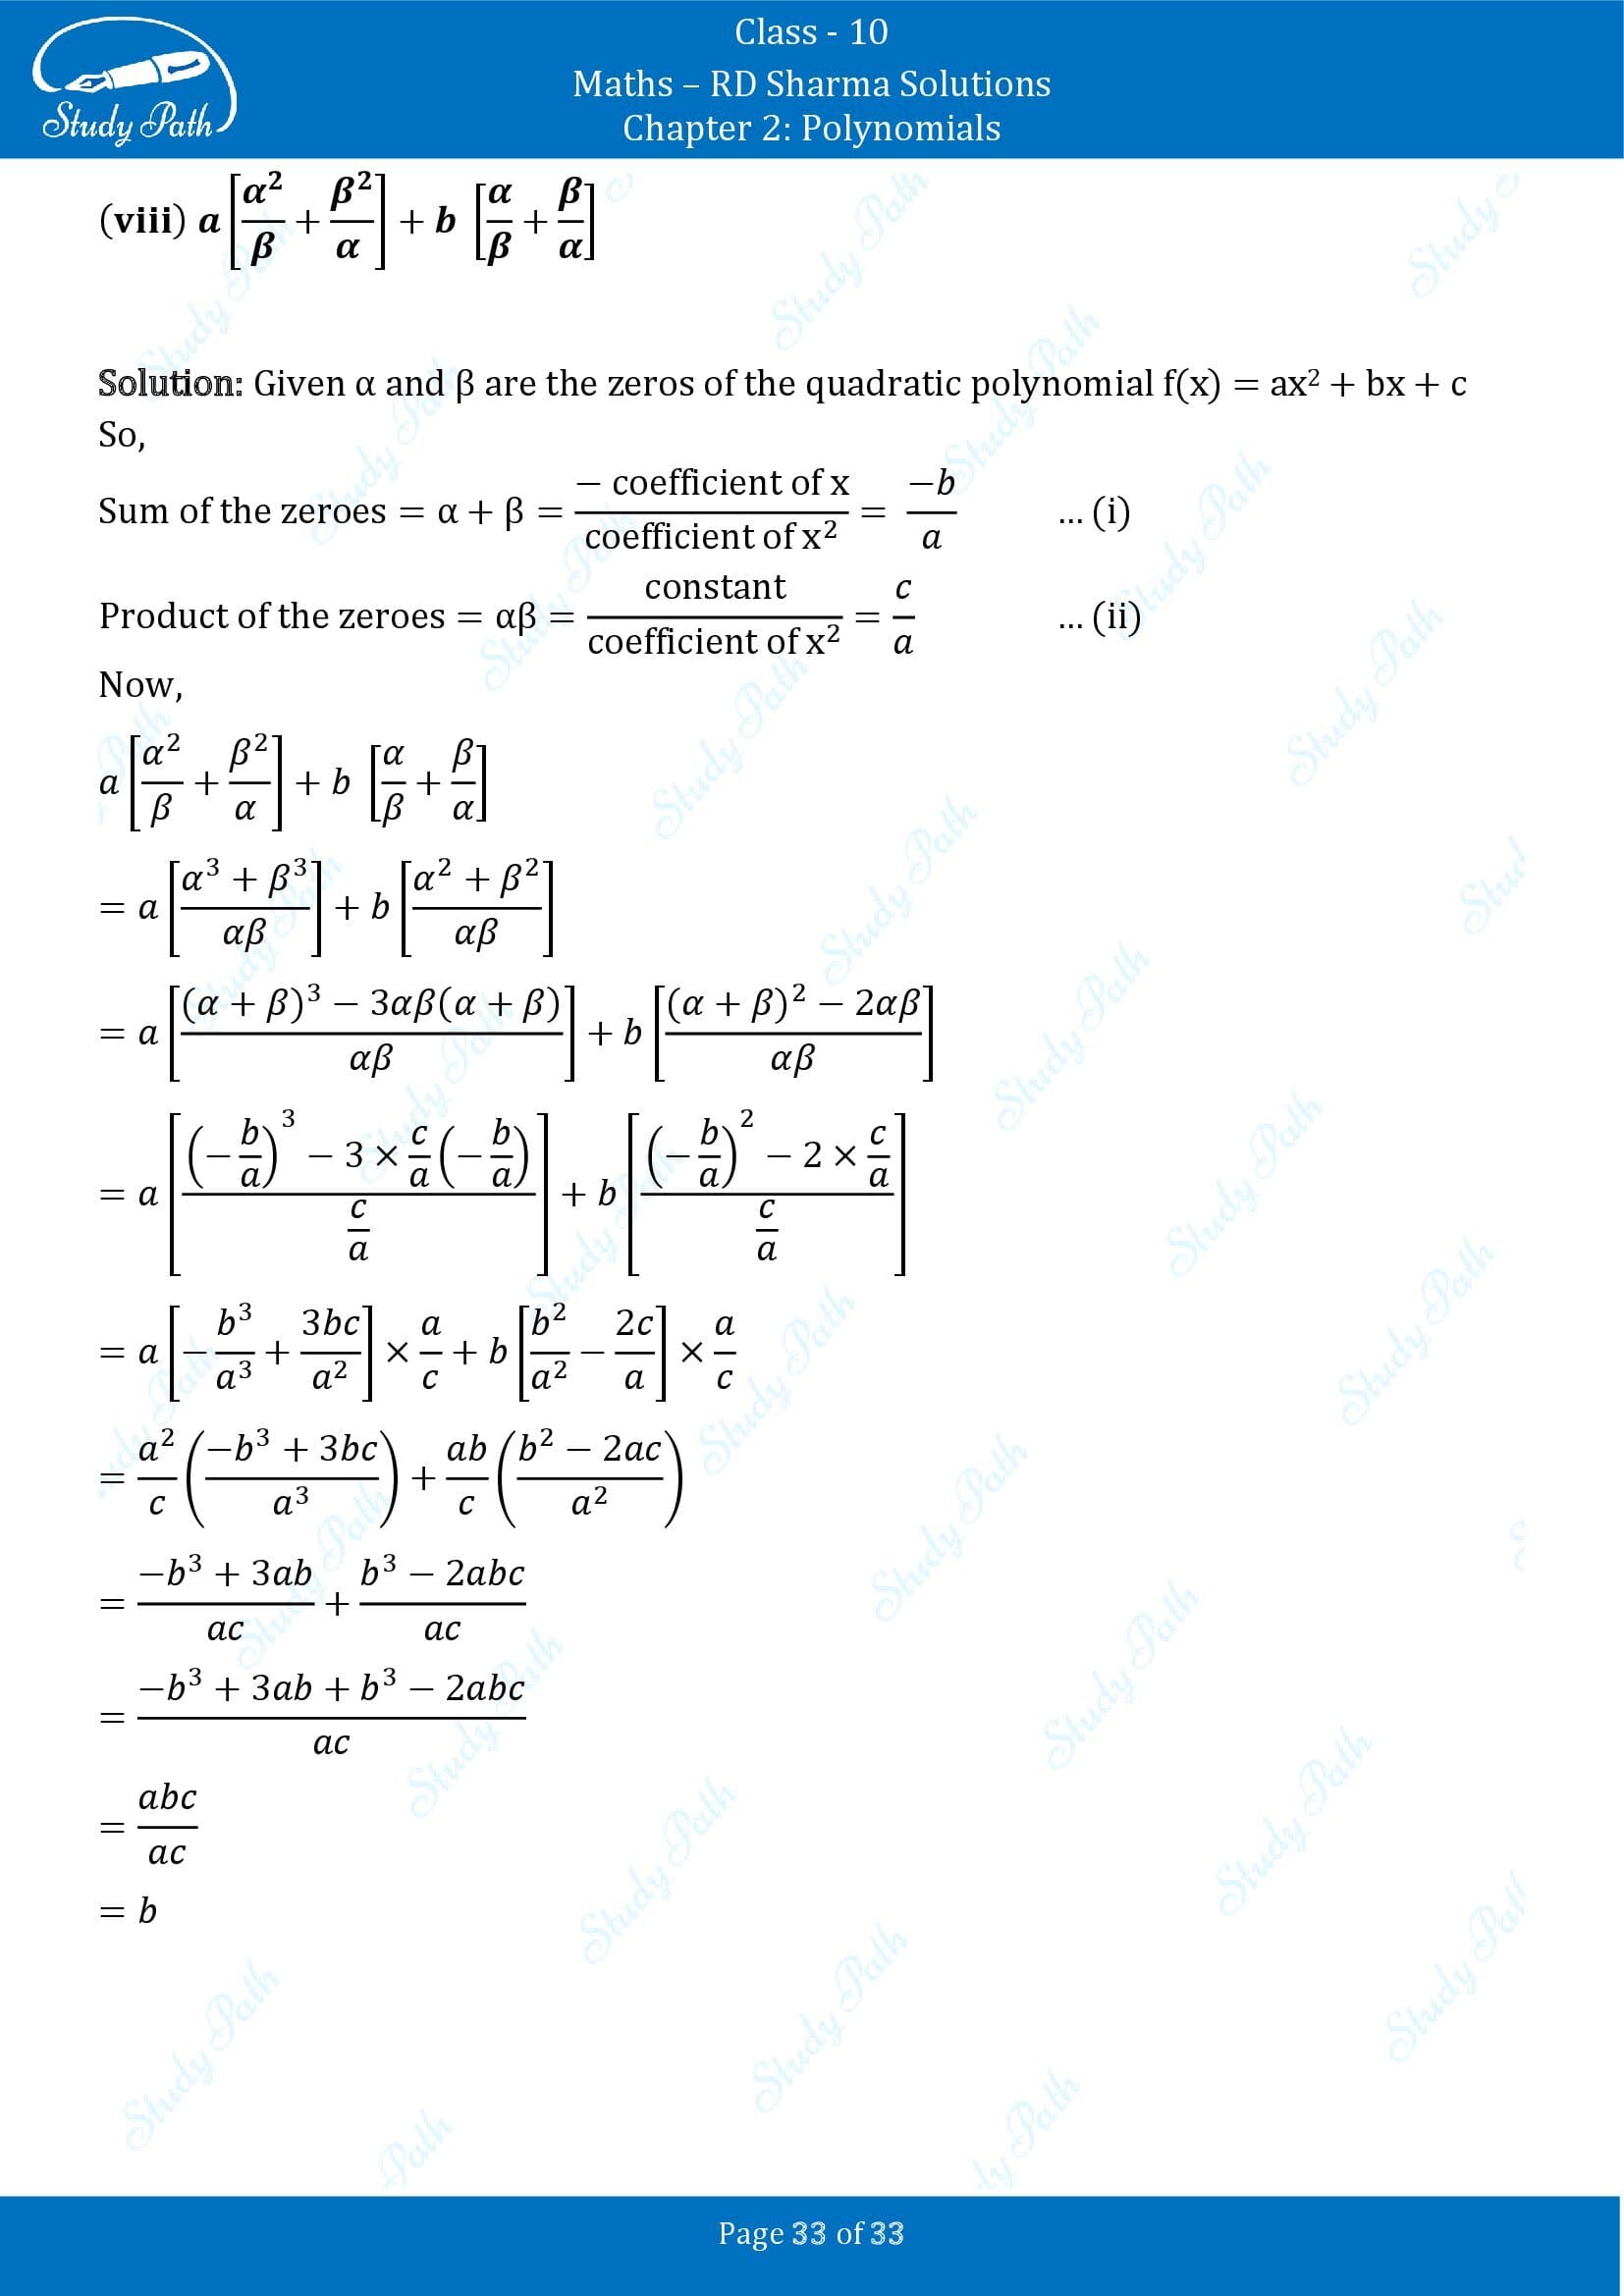 RD Sharma Solutions Class 10 Chapter 2 Polynomials Exercise 2.1 00033